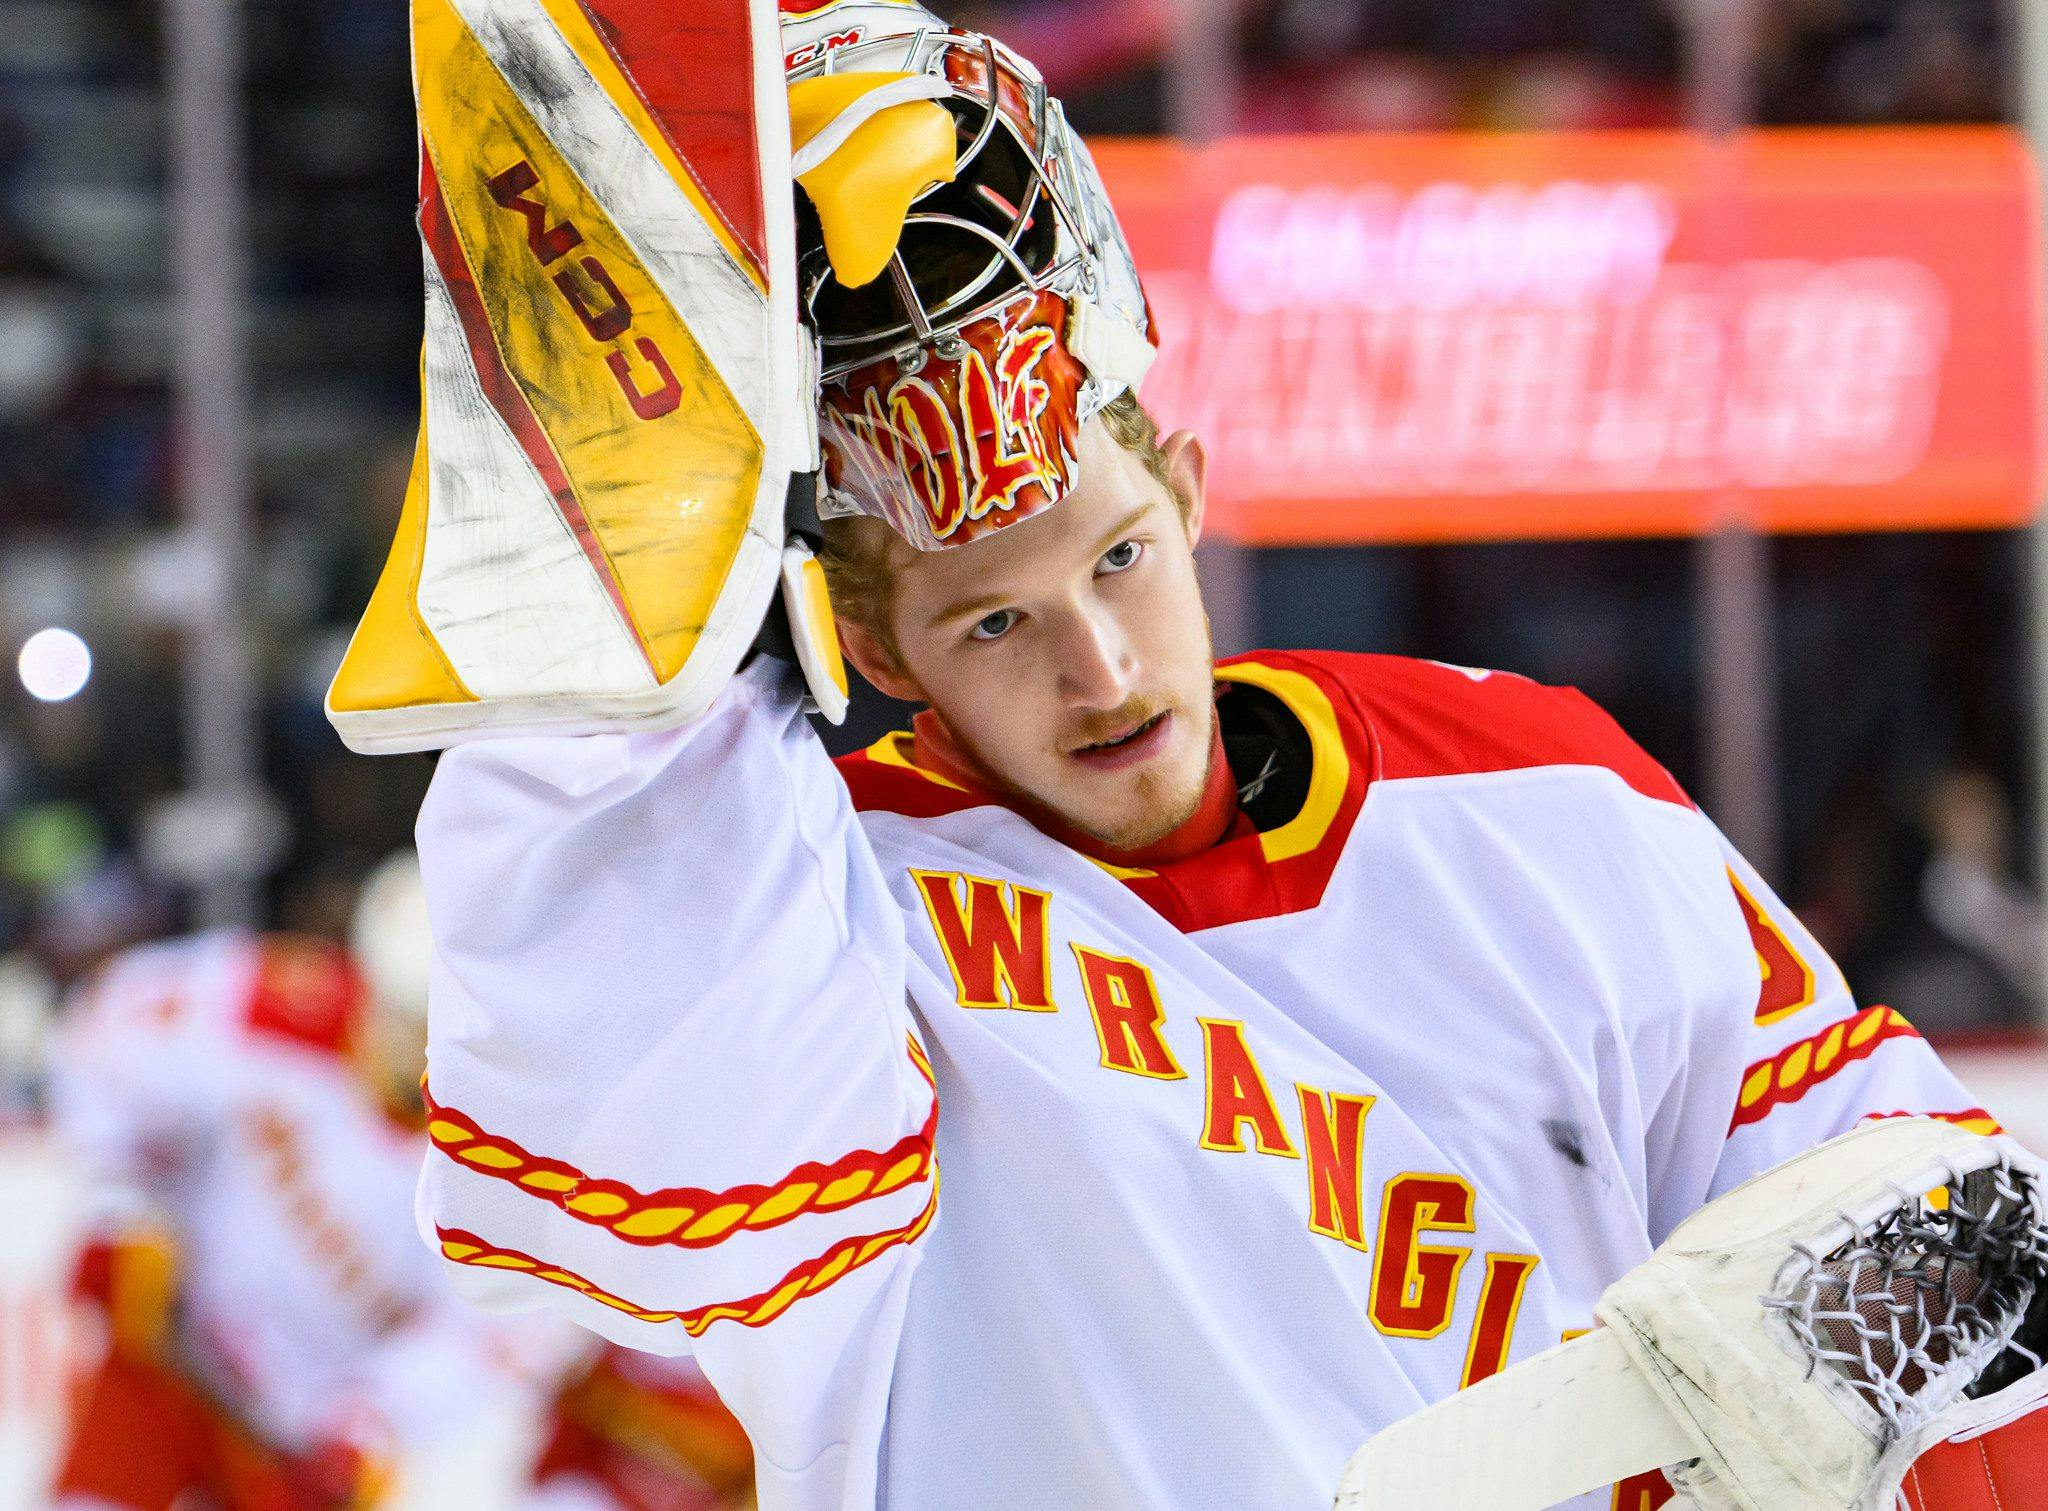 Calgary’s Dustin Wolf is the best NHL goalie prospect right now